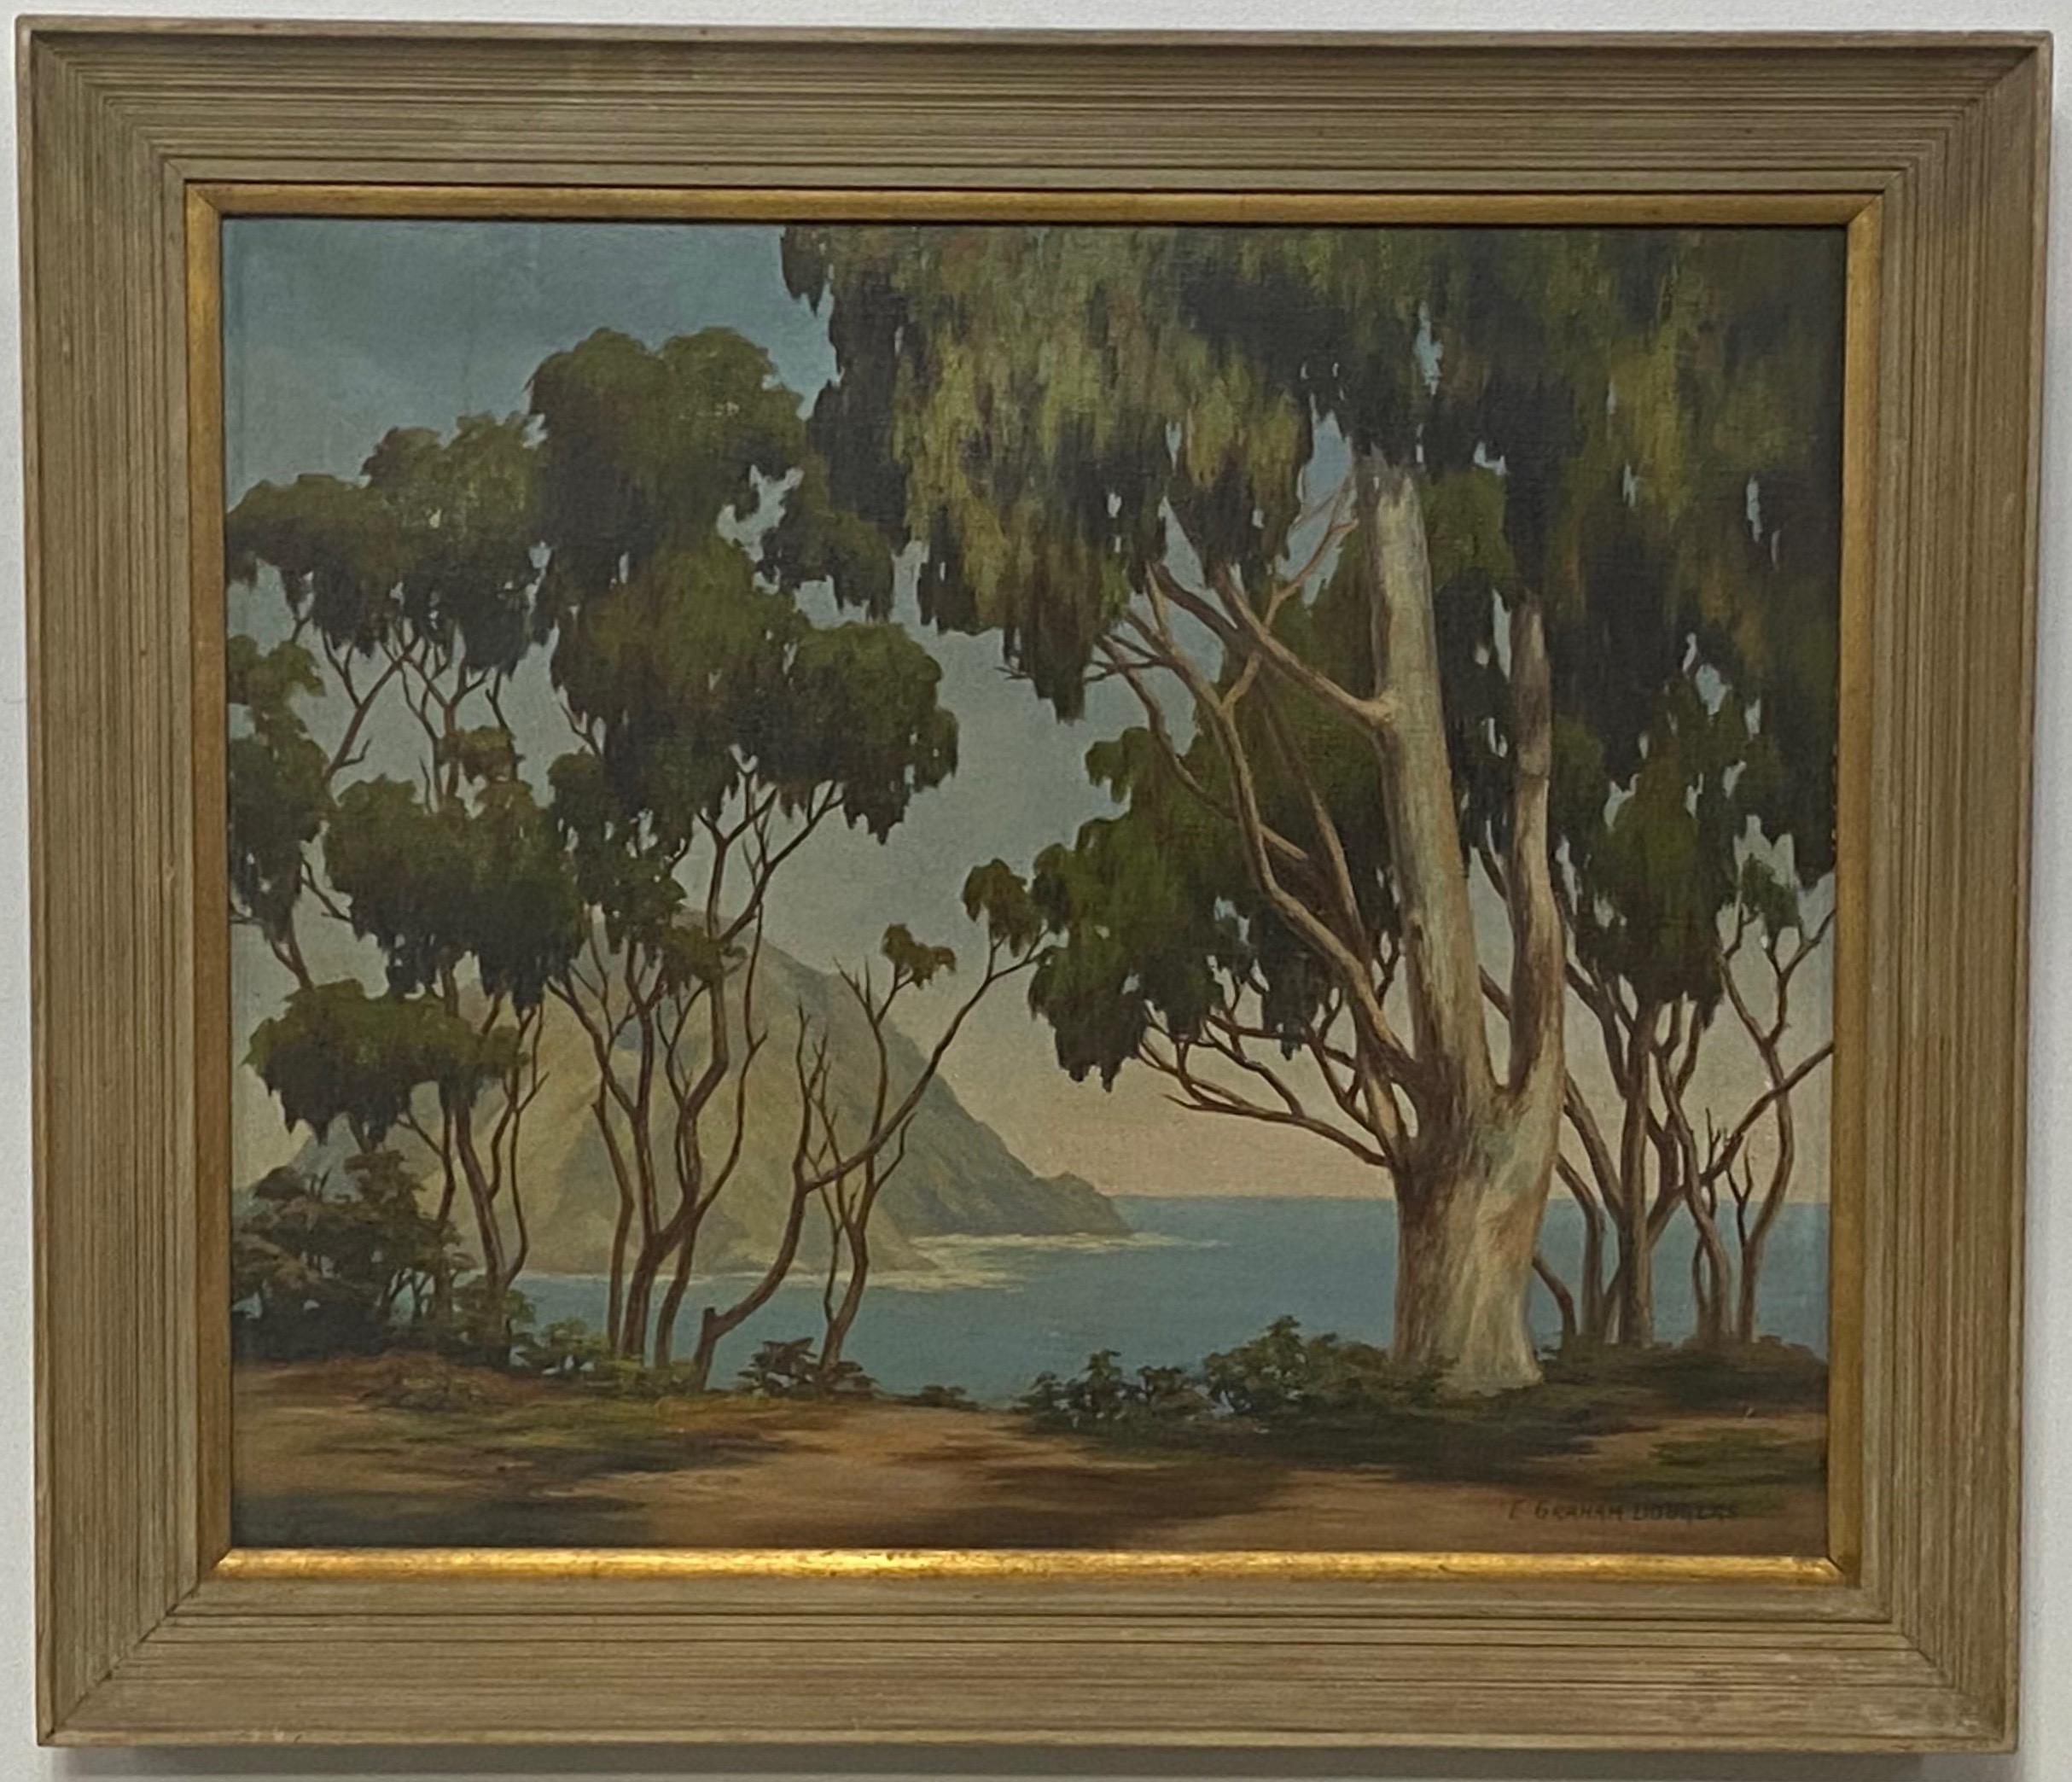 Hand-Painted California Landscape Painting of Morro Bay by Earl Graham Douglas